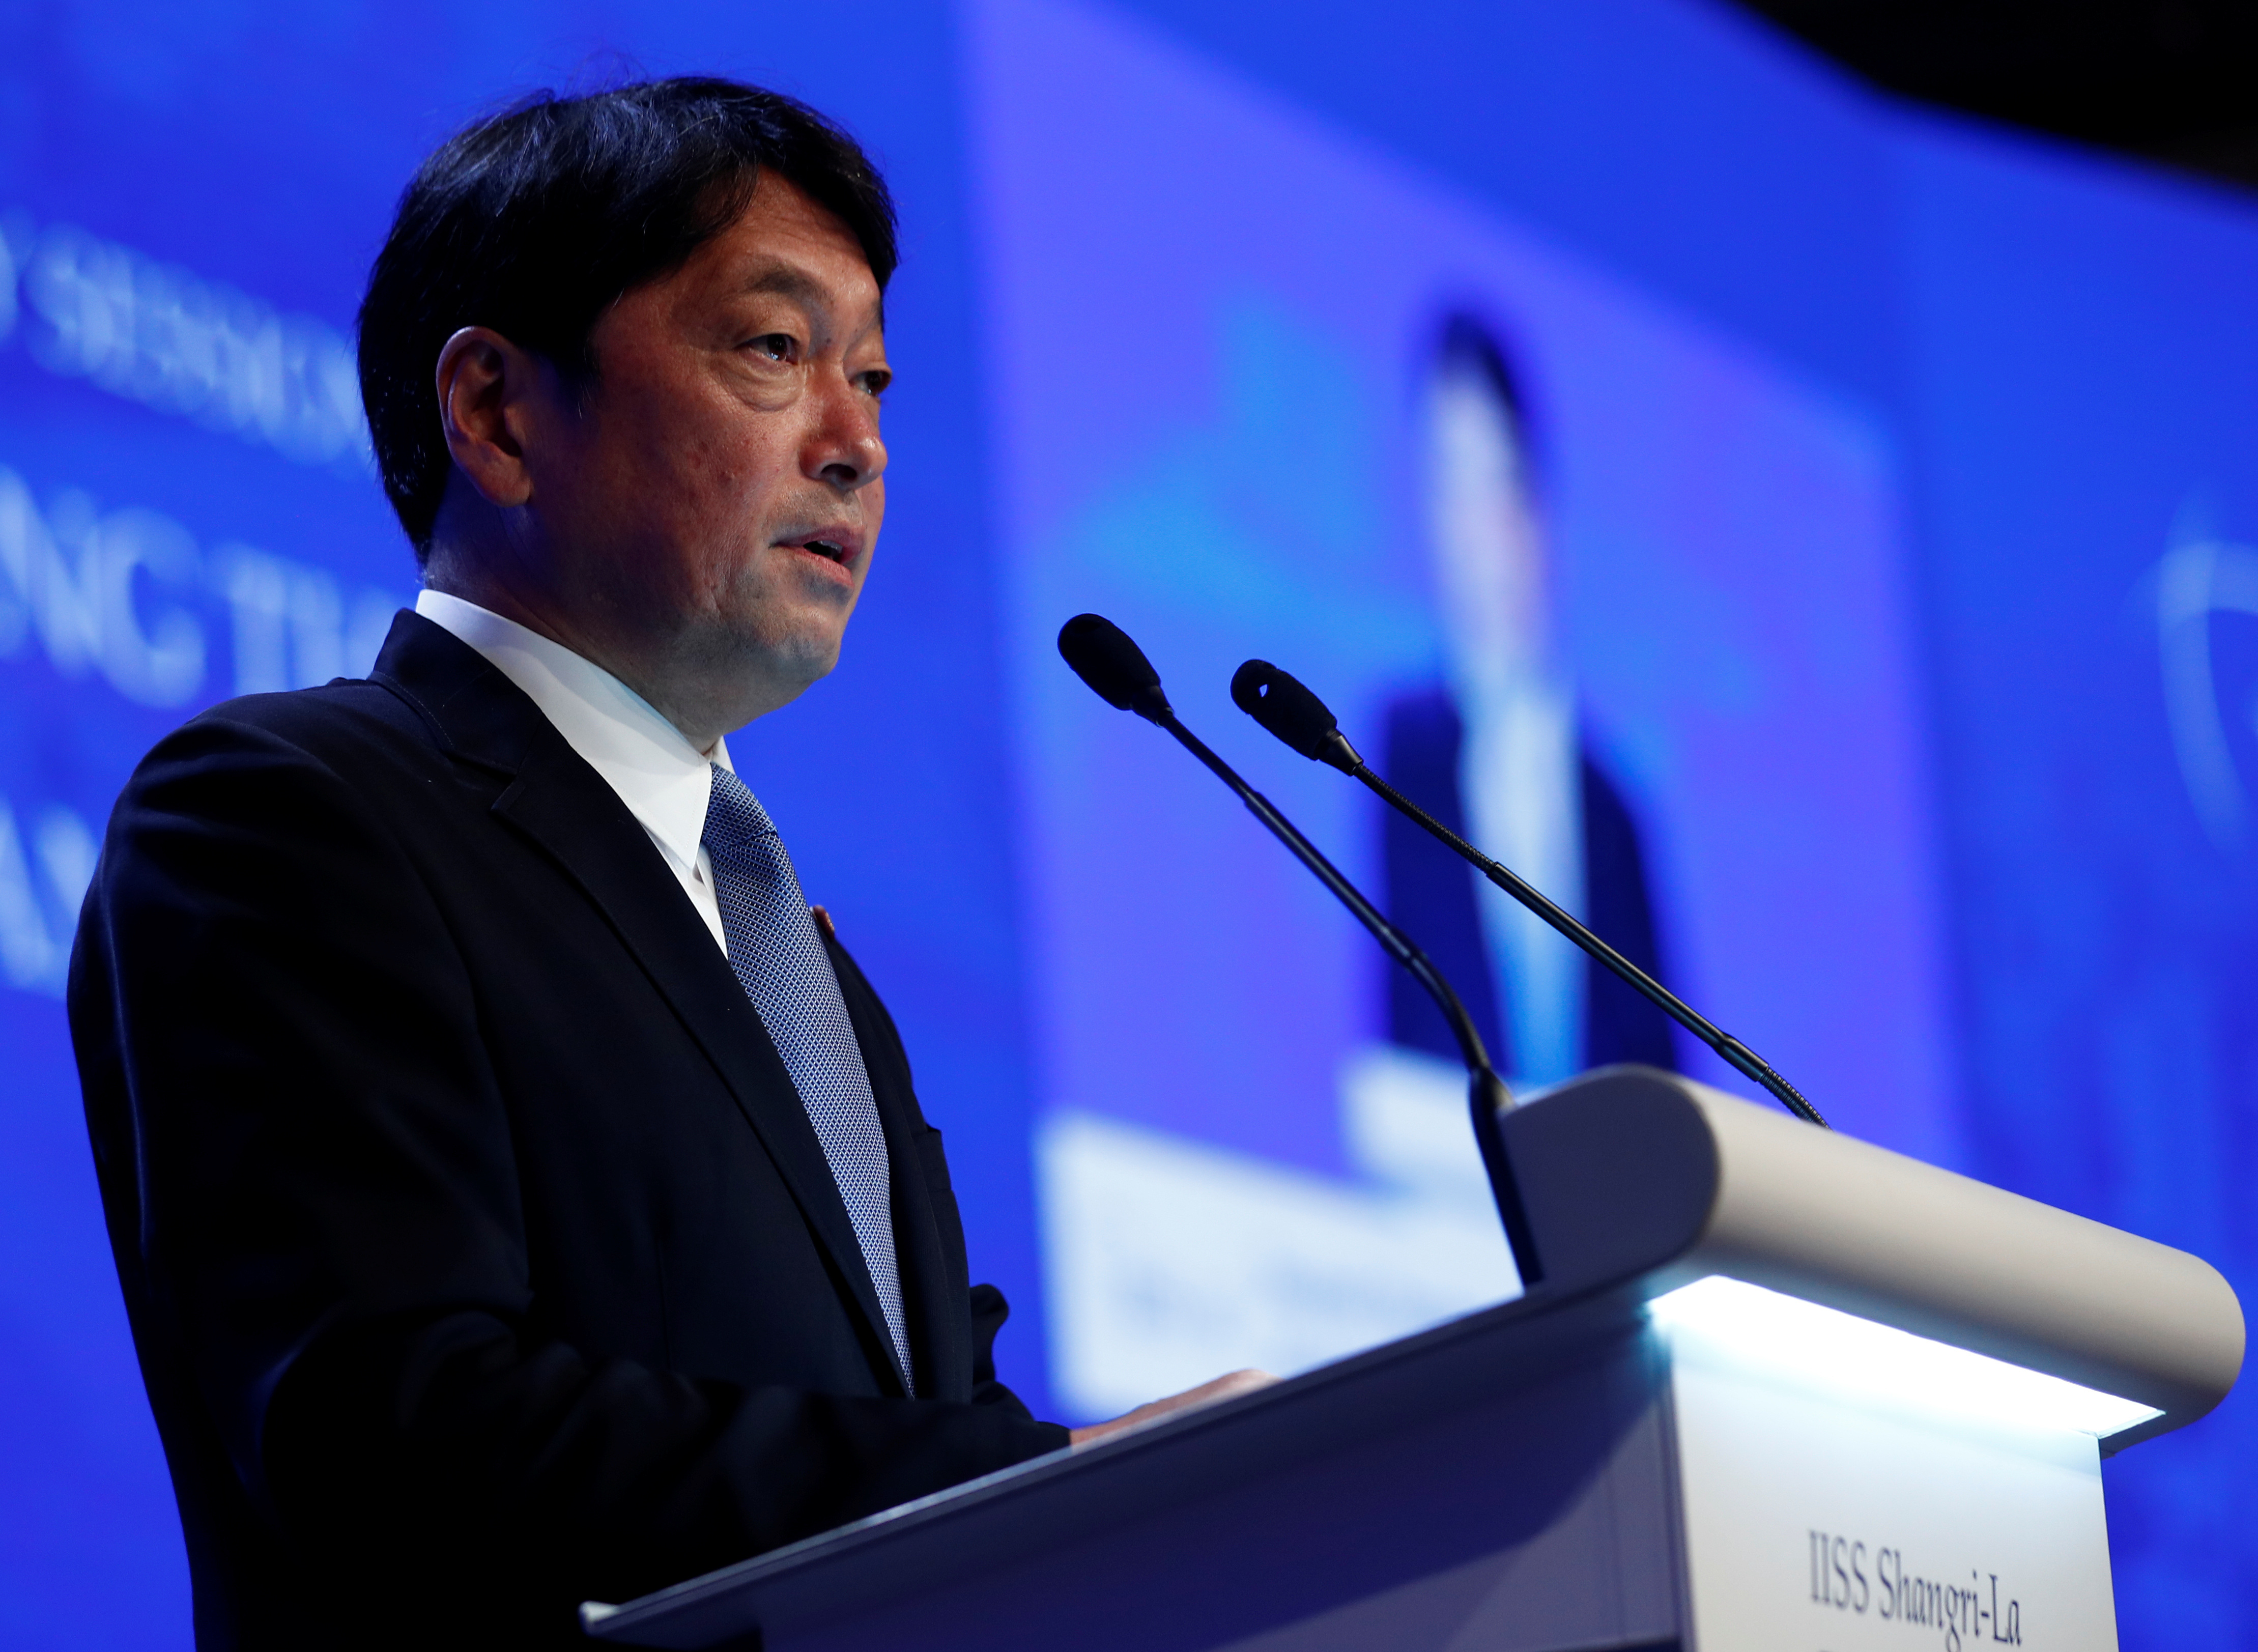 Japan's Defence Minister Itsunori Onodera speaks at the IISS Shangri-la Dialogue in Singapore